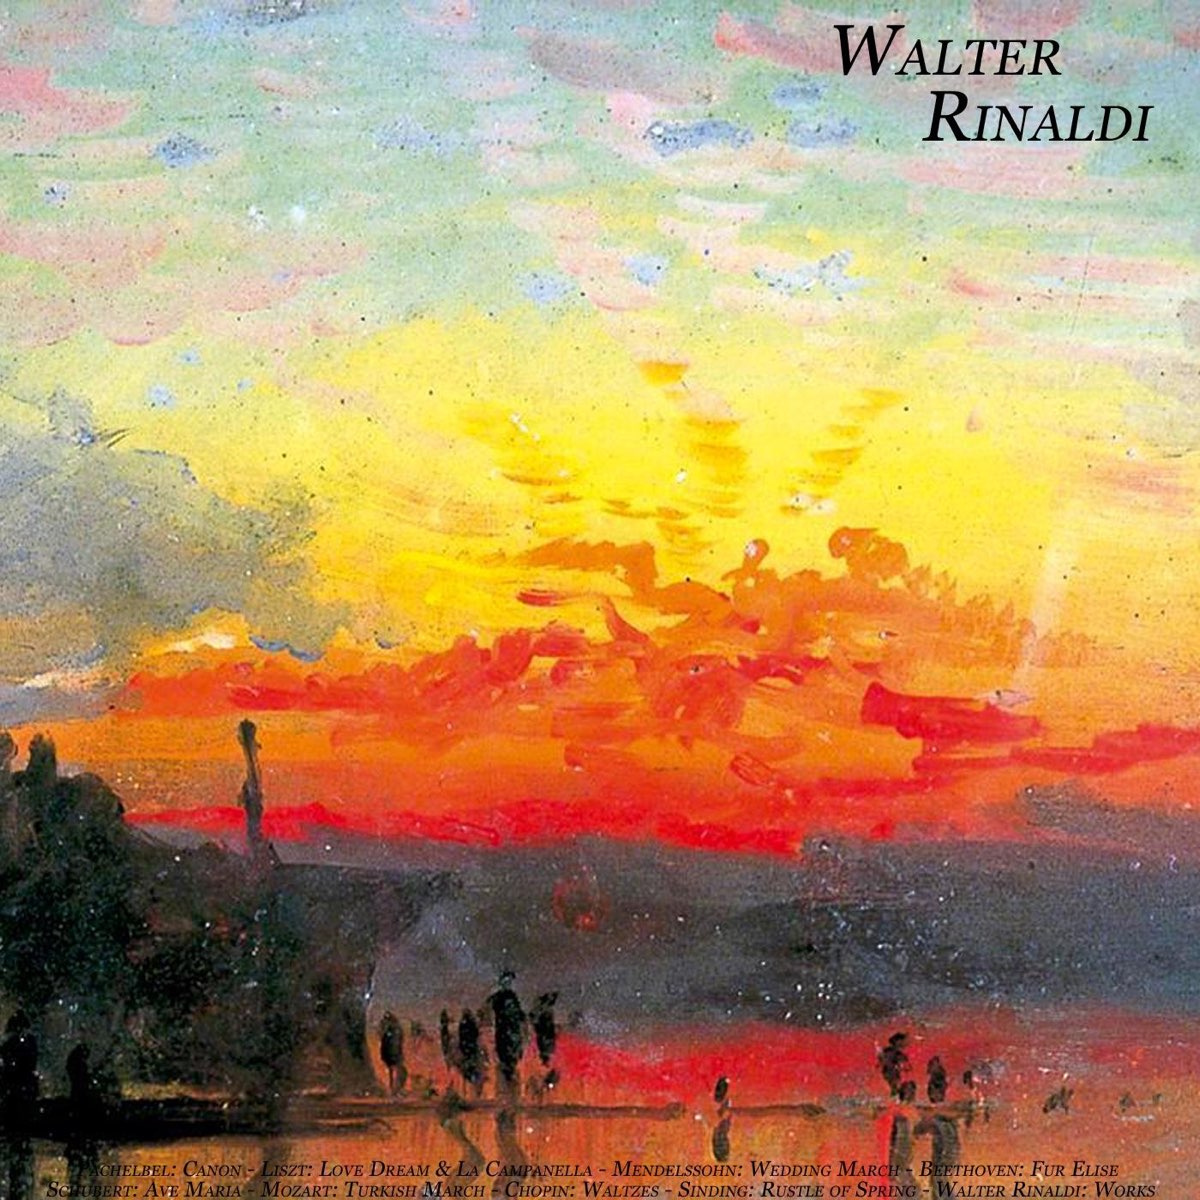 Pachelbel: Canon - Liszt: Love Dream & La Campanella - Mendelssohn: Wedding March - Beethoven: Fur Elise - Schubert: Ave Maria - Mozart: Turkish March - Chopin: Waltzes - Sinding: Rustle of Spring - Walter Rinaldi: WorksSelect a country or regionSelect a country or region